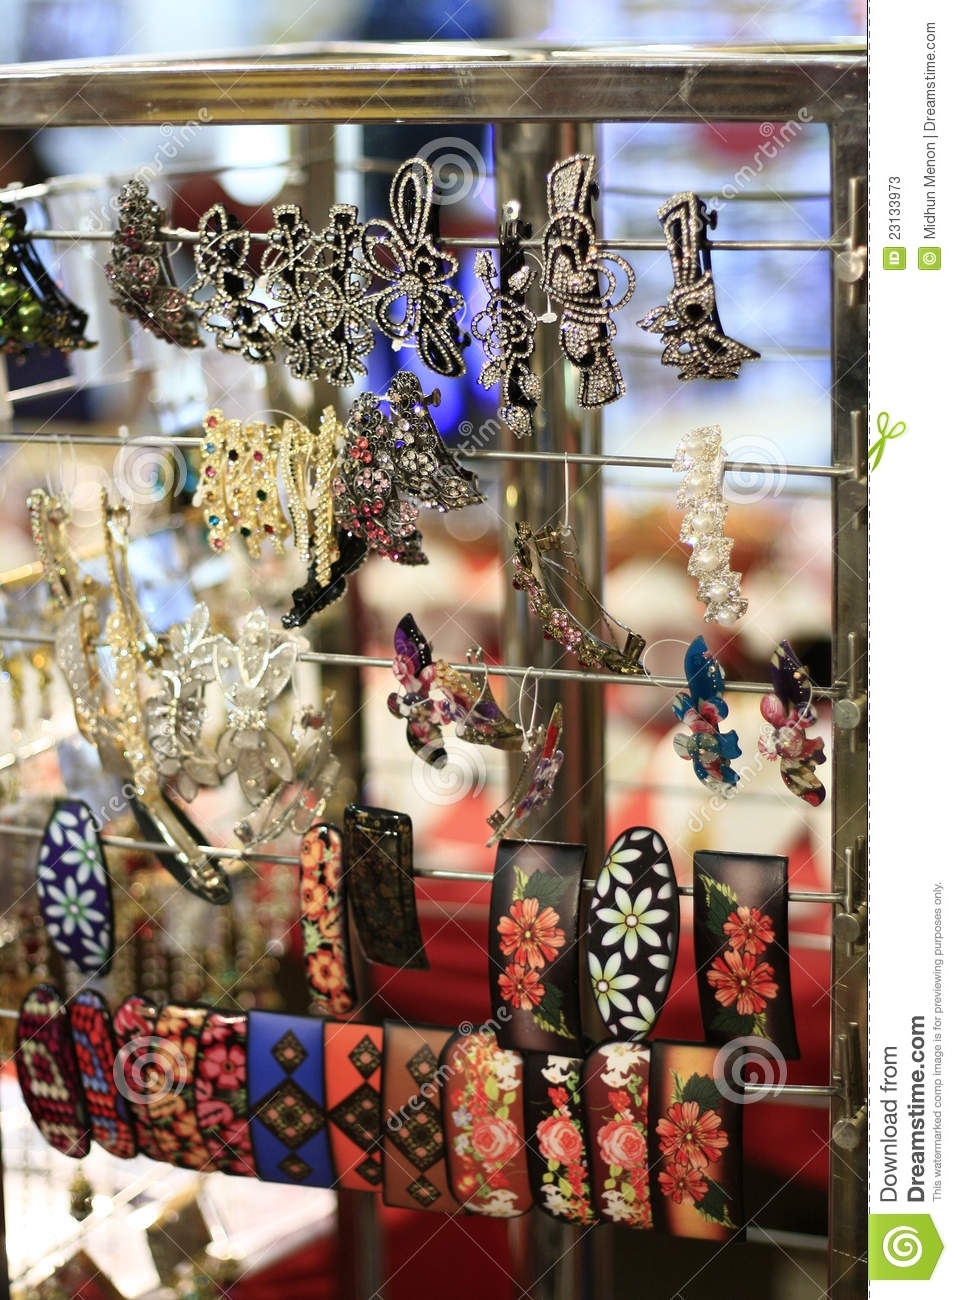 Oriental &amp; Indian Handmade Hair Clips For Sale Stock Image in Indian Hair Accessories For Sale